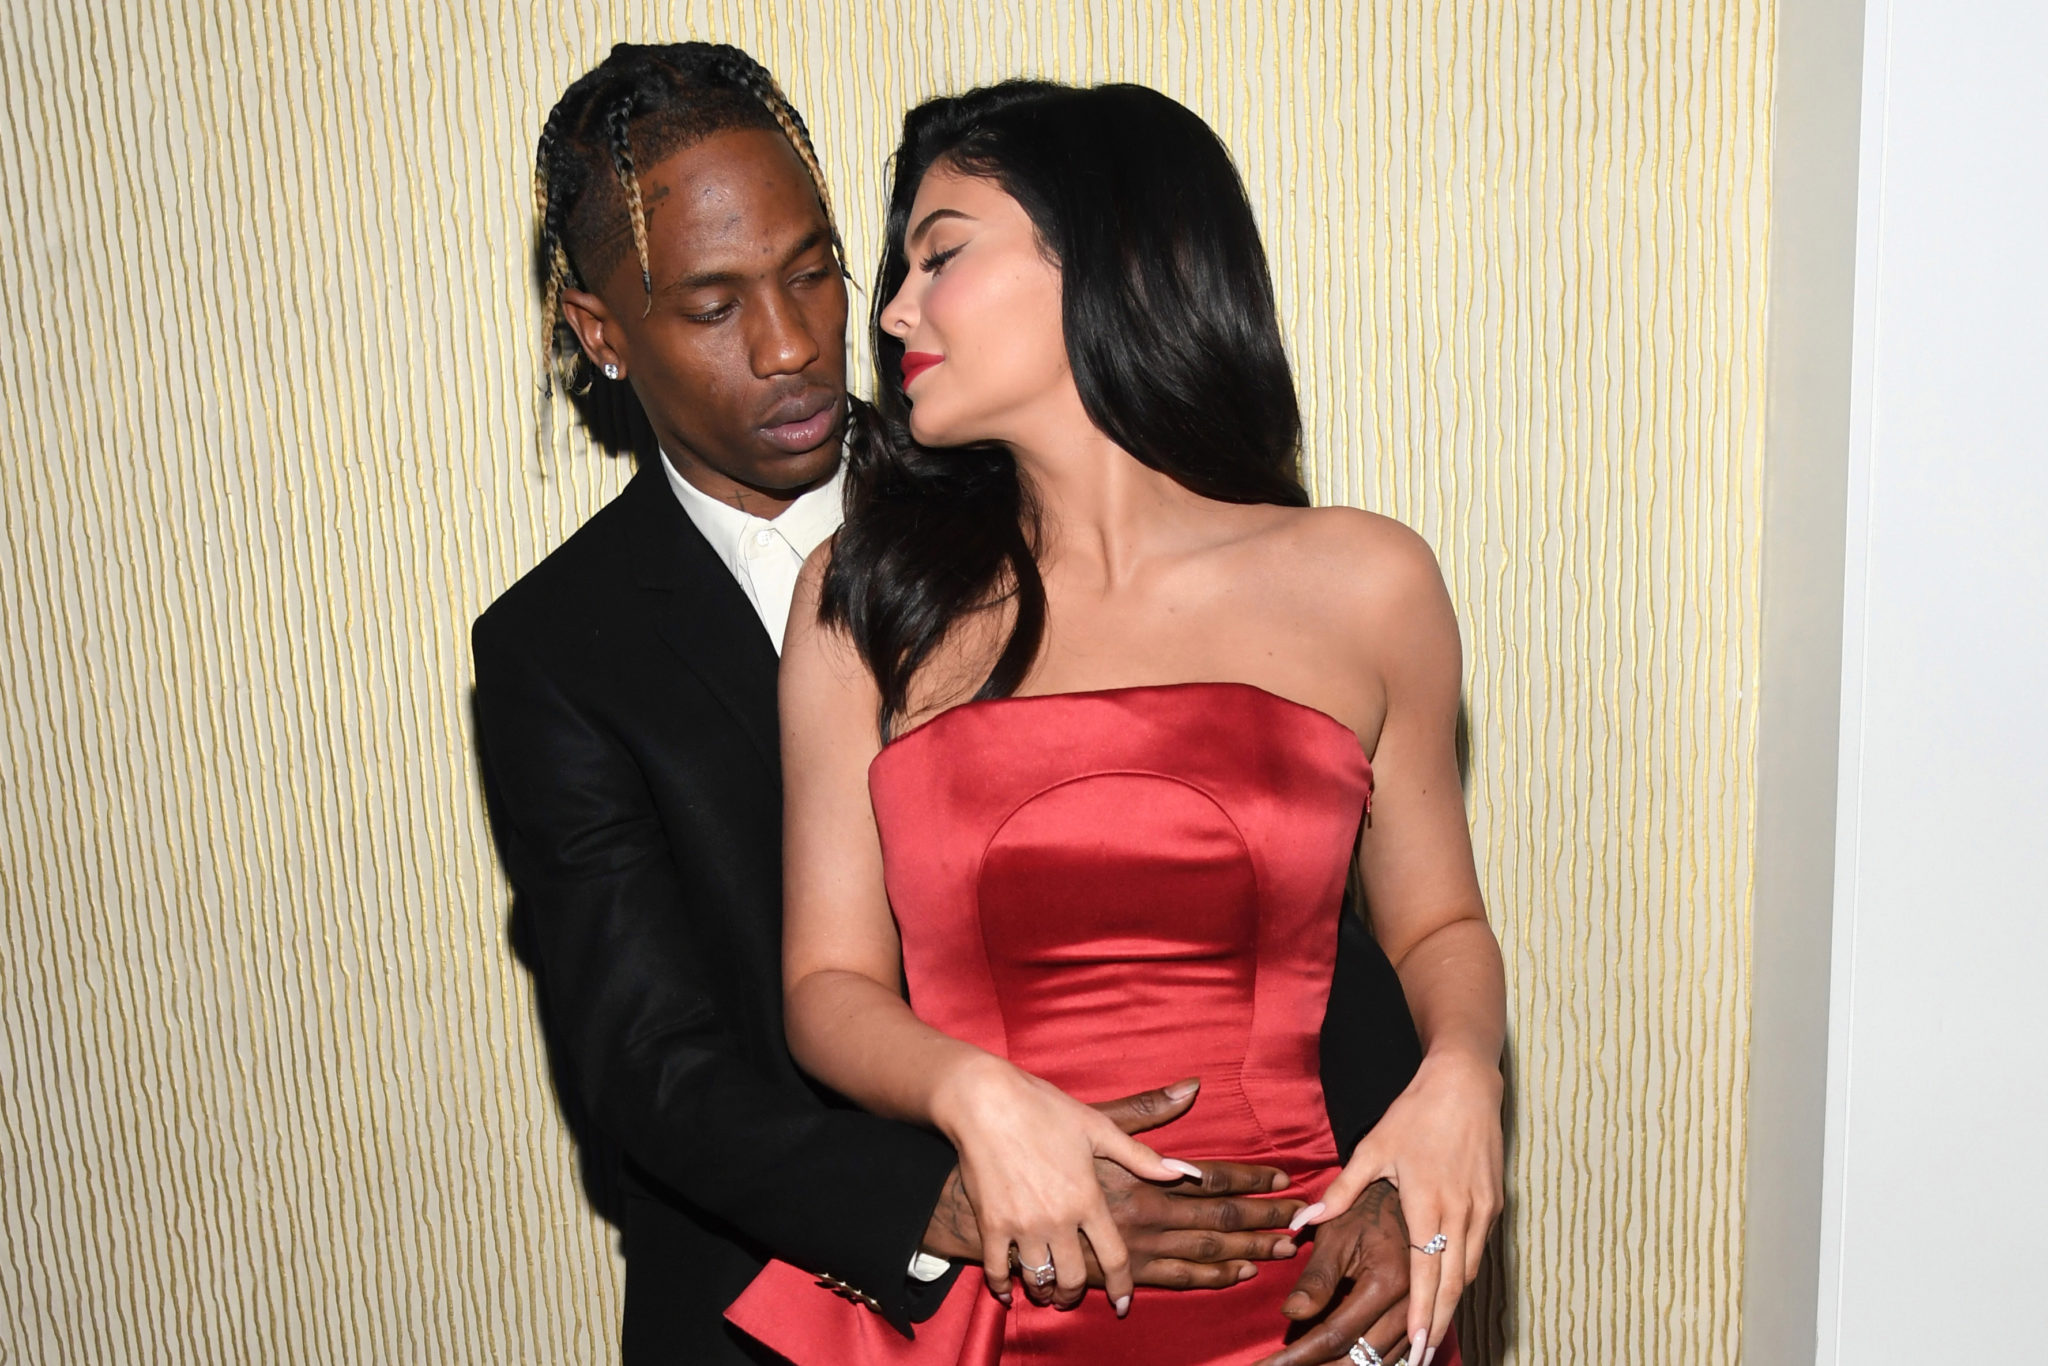 Kylie Jenner Is Back With Travis Scott They've Been Dating for a Month